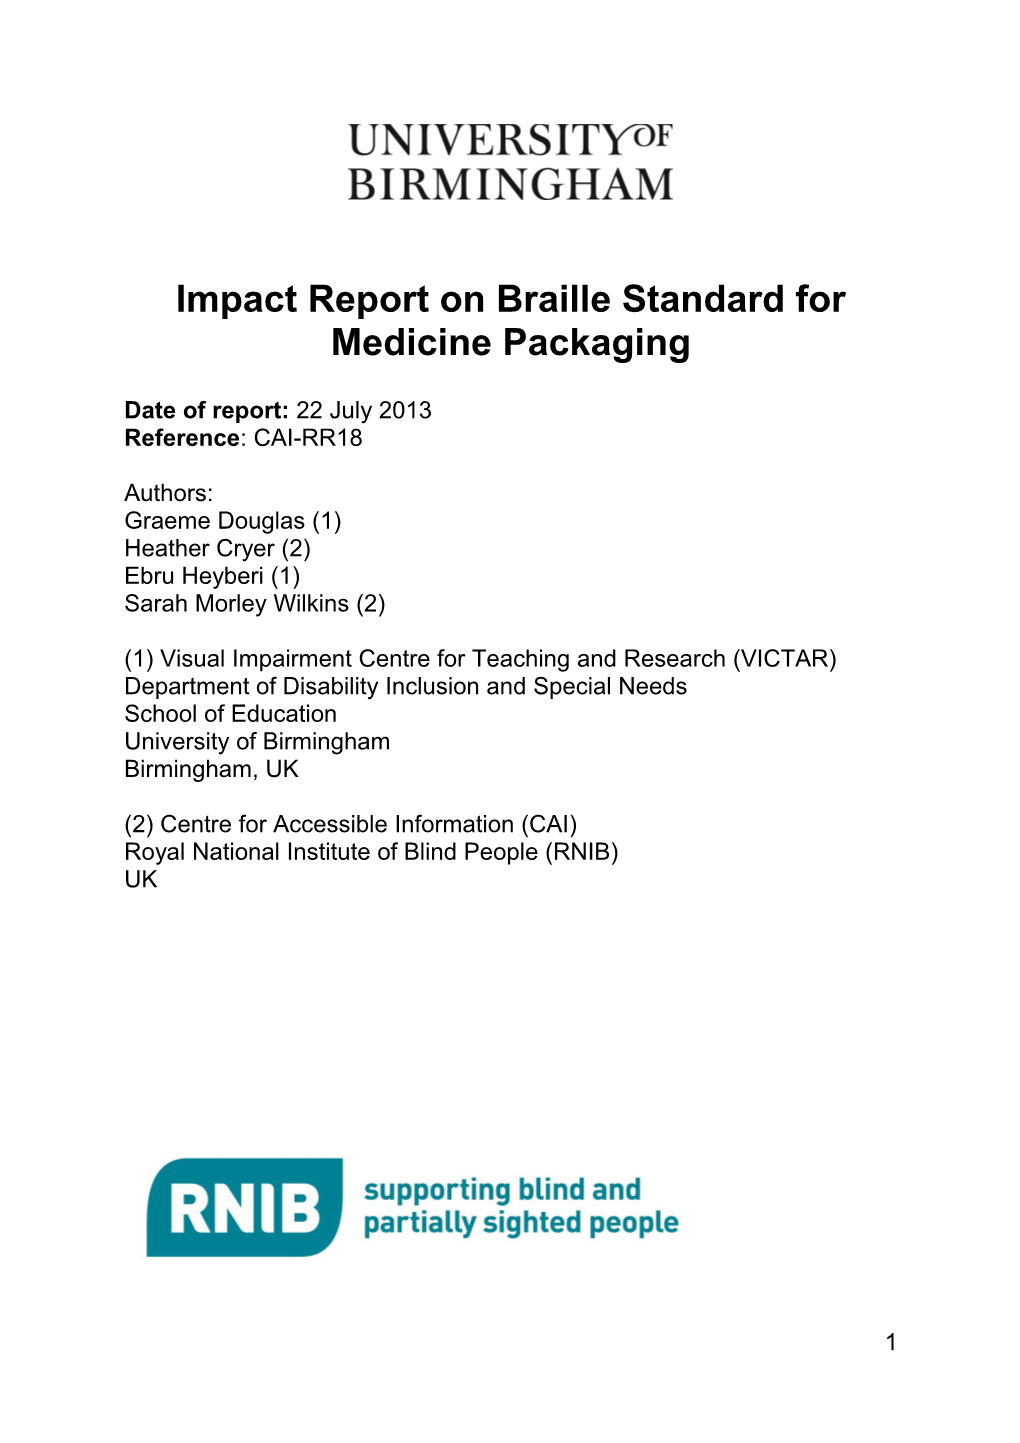 Impact Report on Braille Standard for Medicine Packaging